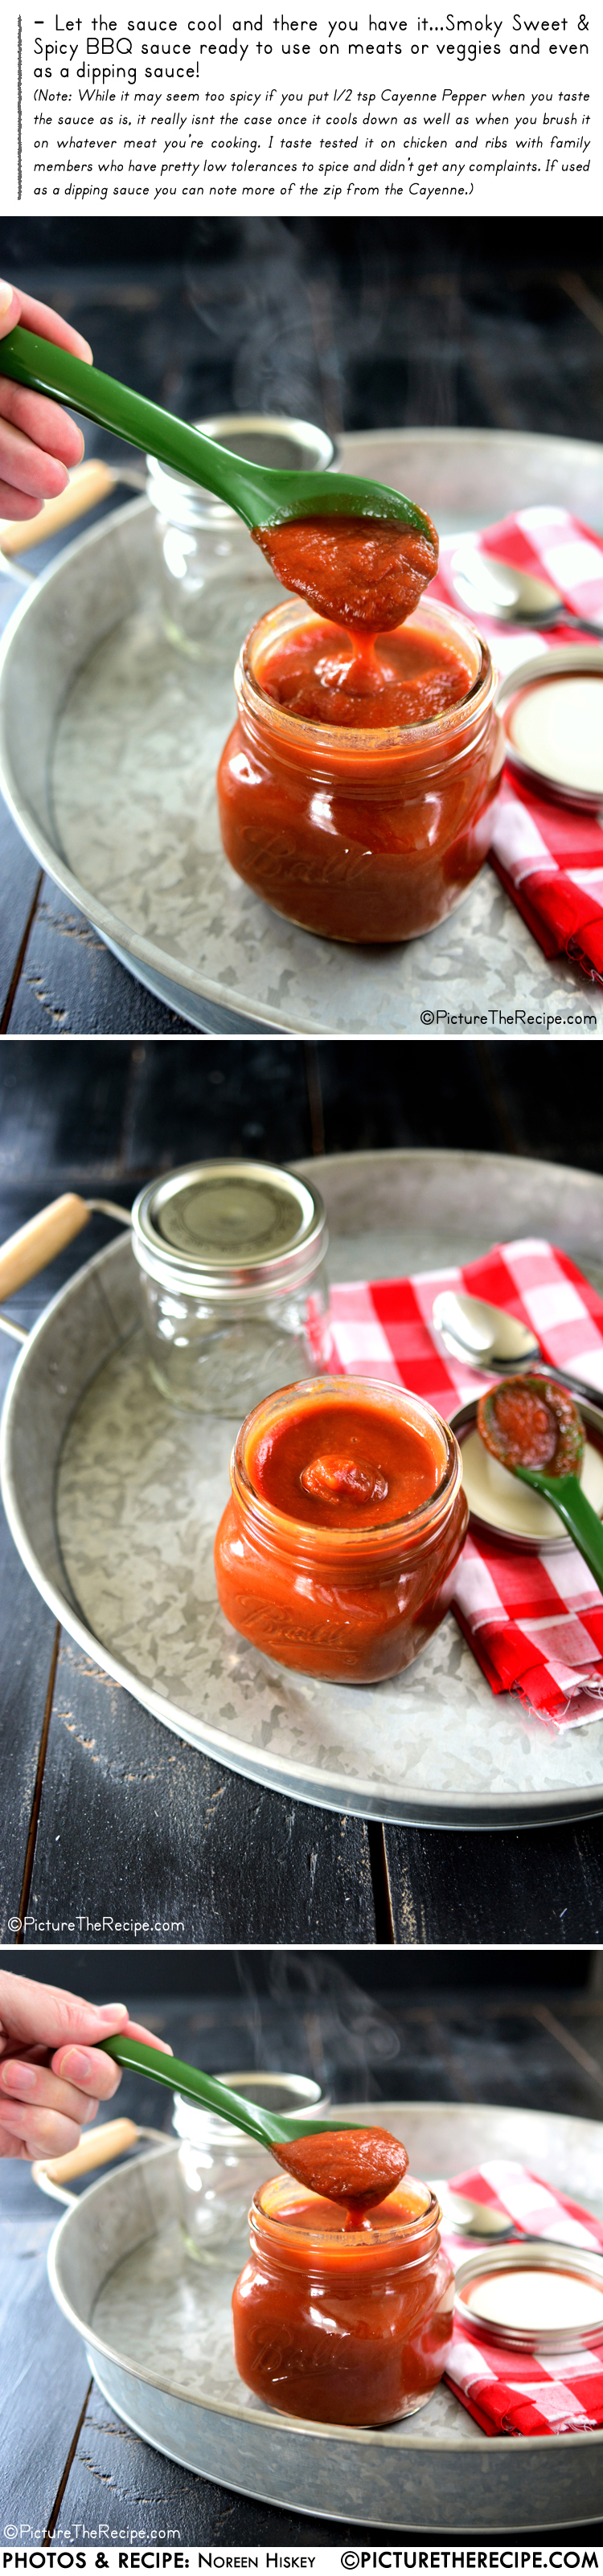 Sweet and Spicy BBQ Sauce- Whole30 Paleo - Recipe - Part 3 (PictureTheRecipe)